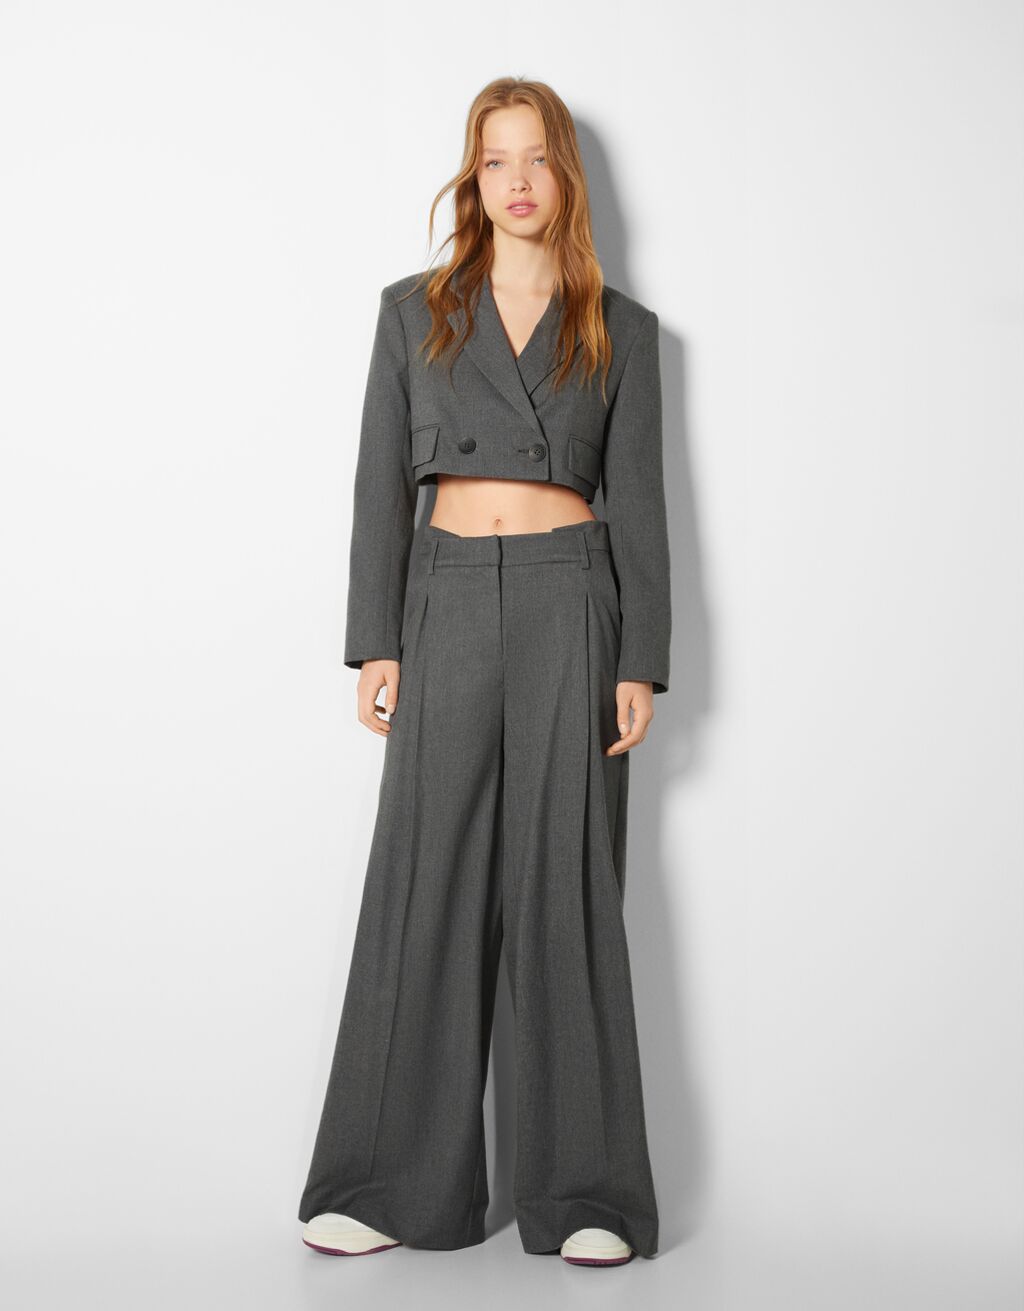 Cropped blazer and trousers set